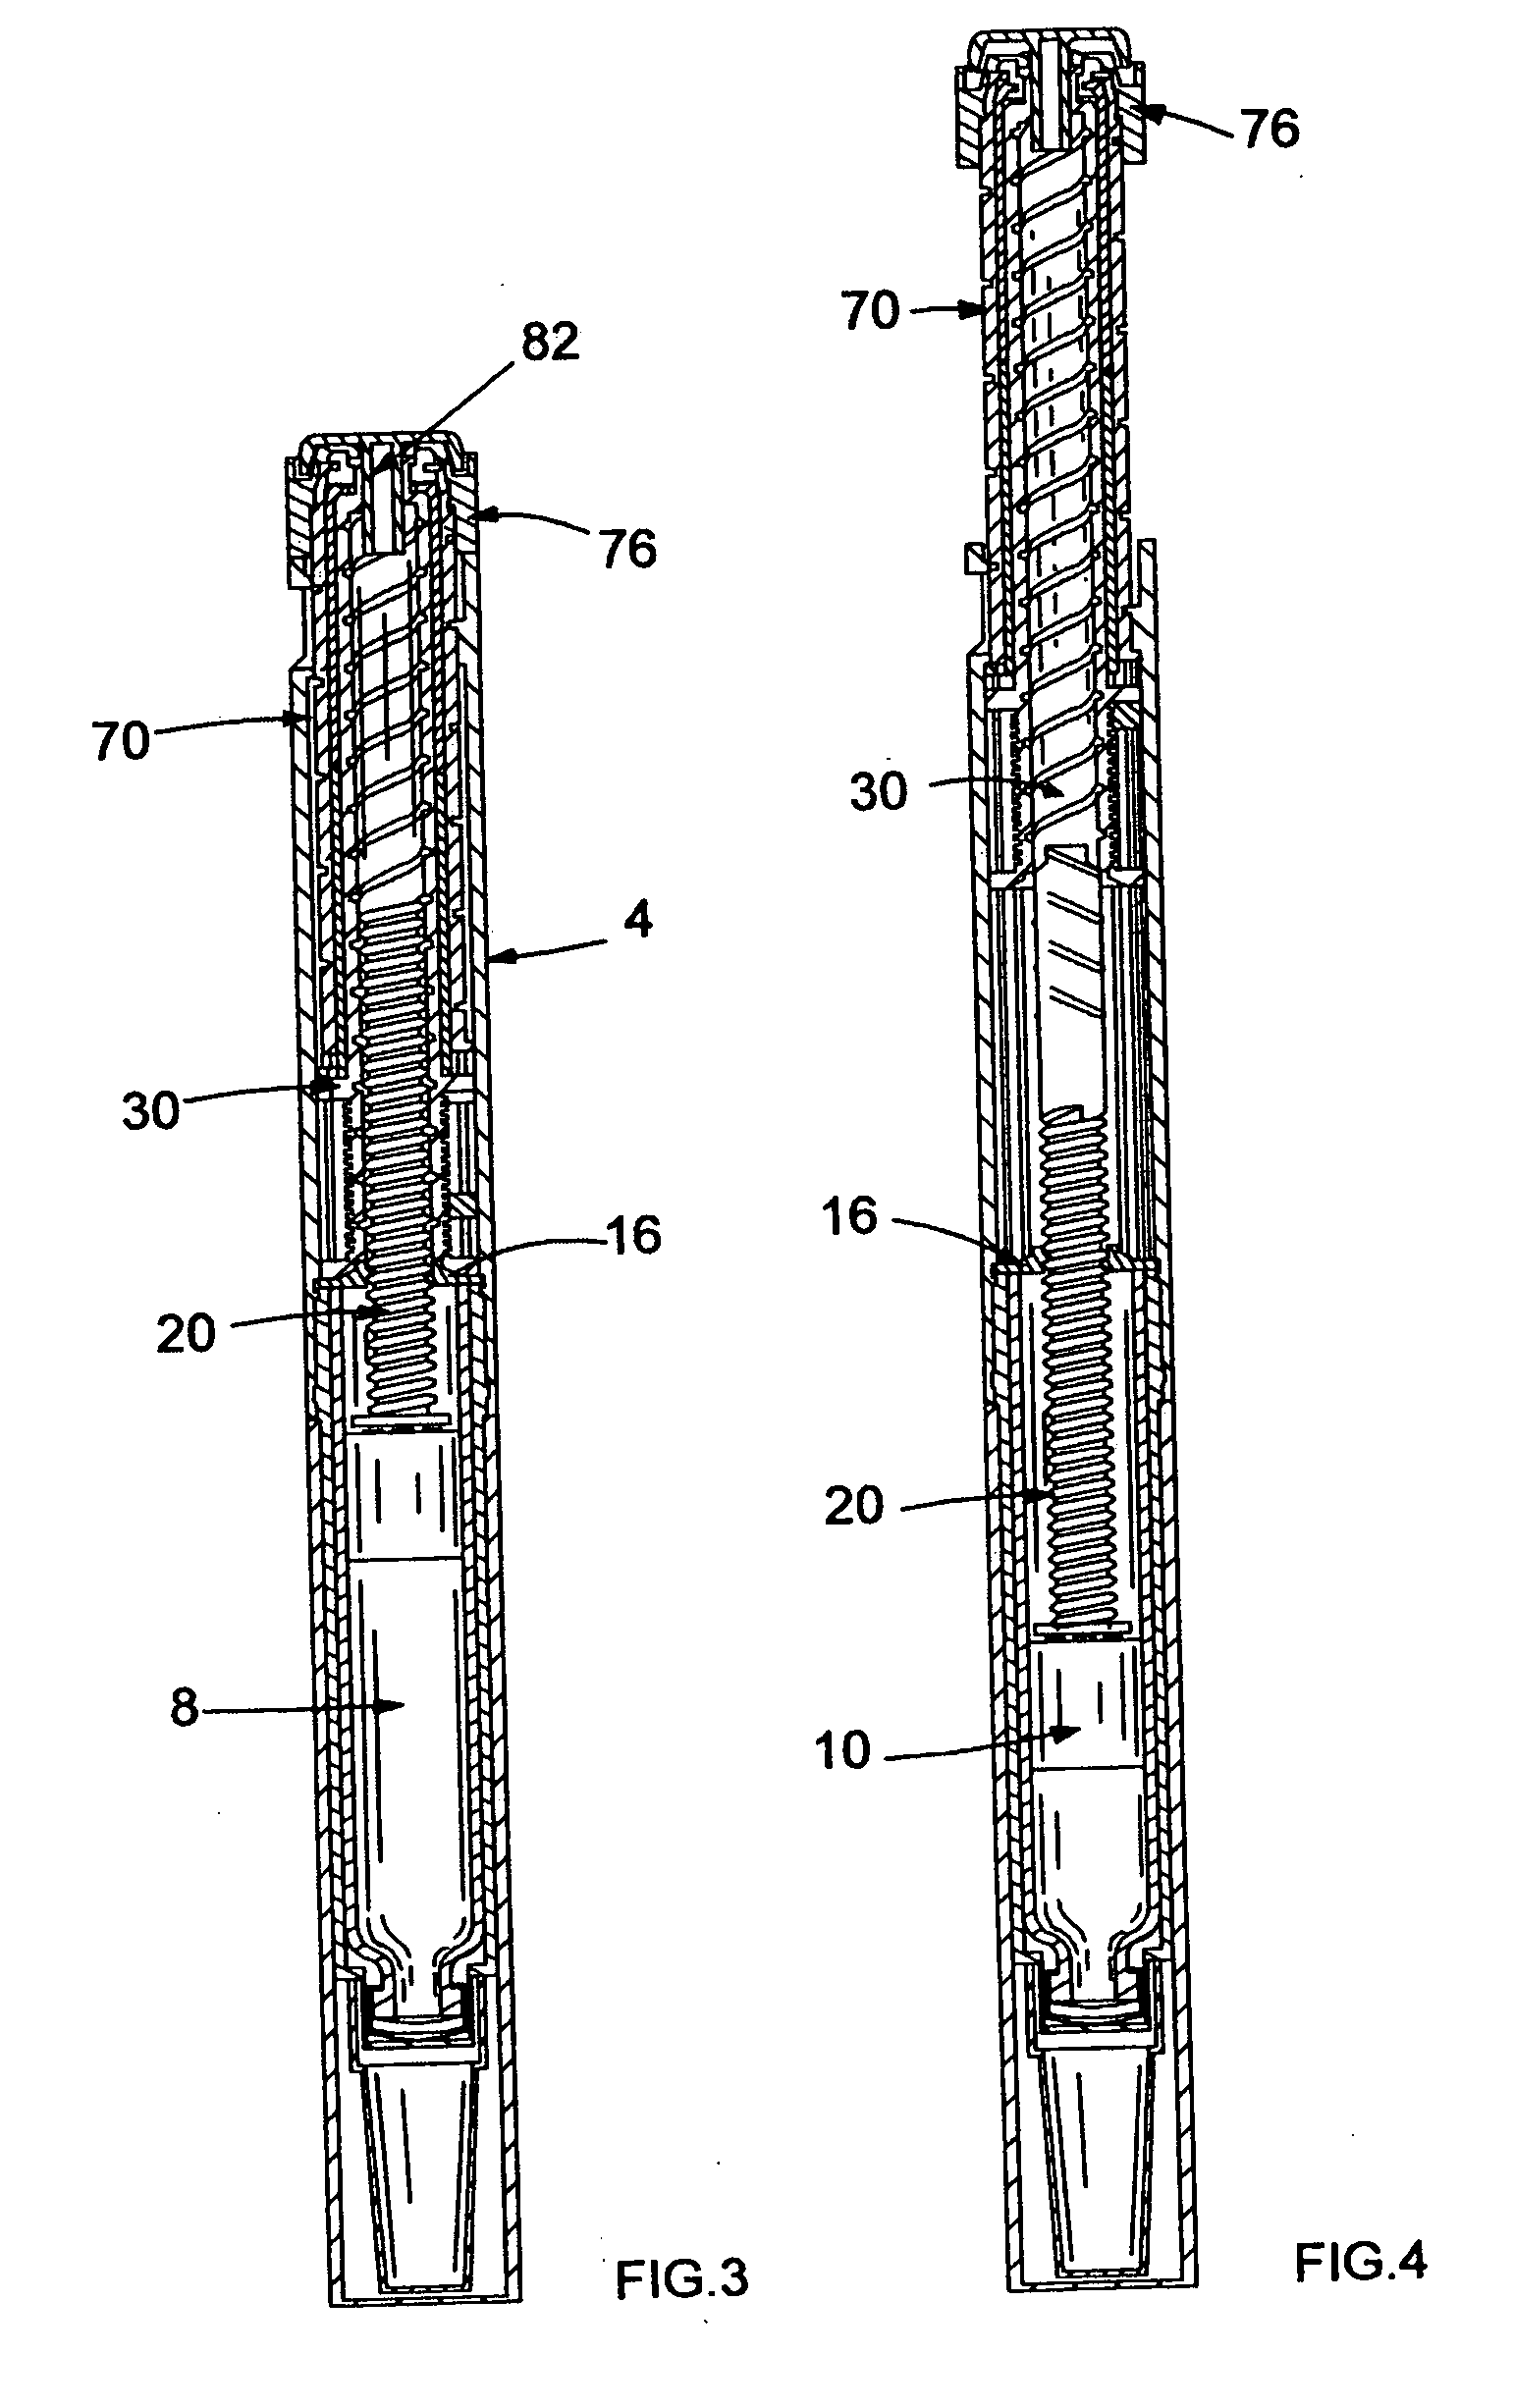 Drive mechanisms suitable for use in drug delivery devices